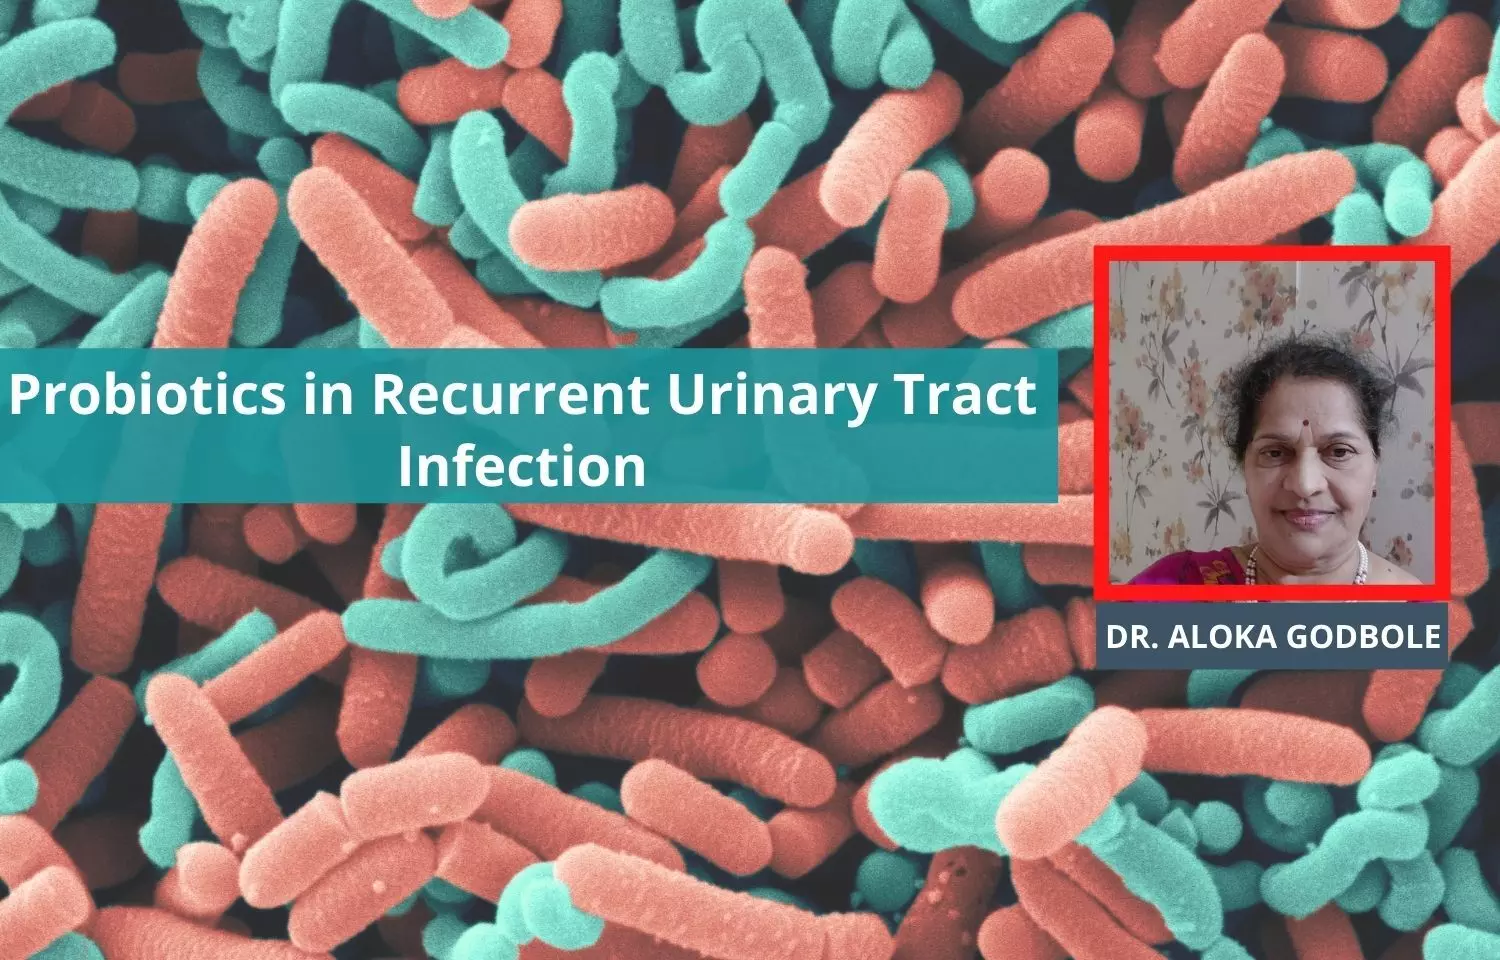 Recurrent urinary tract infection and beneficial role of probiotics: Review